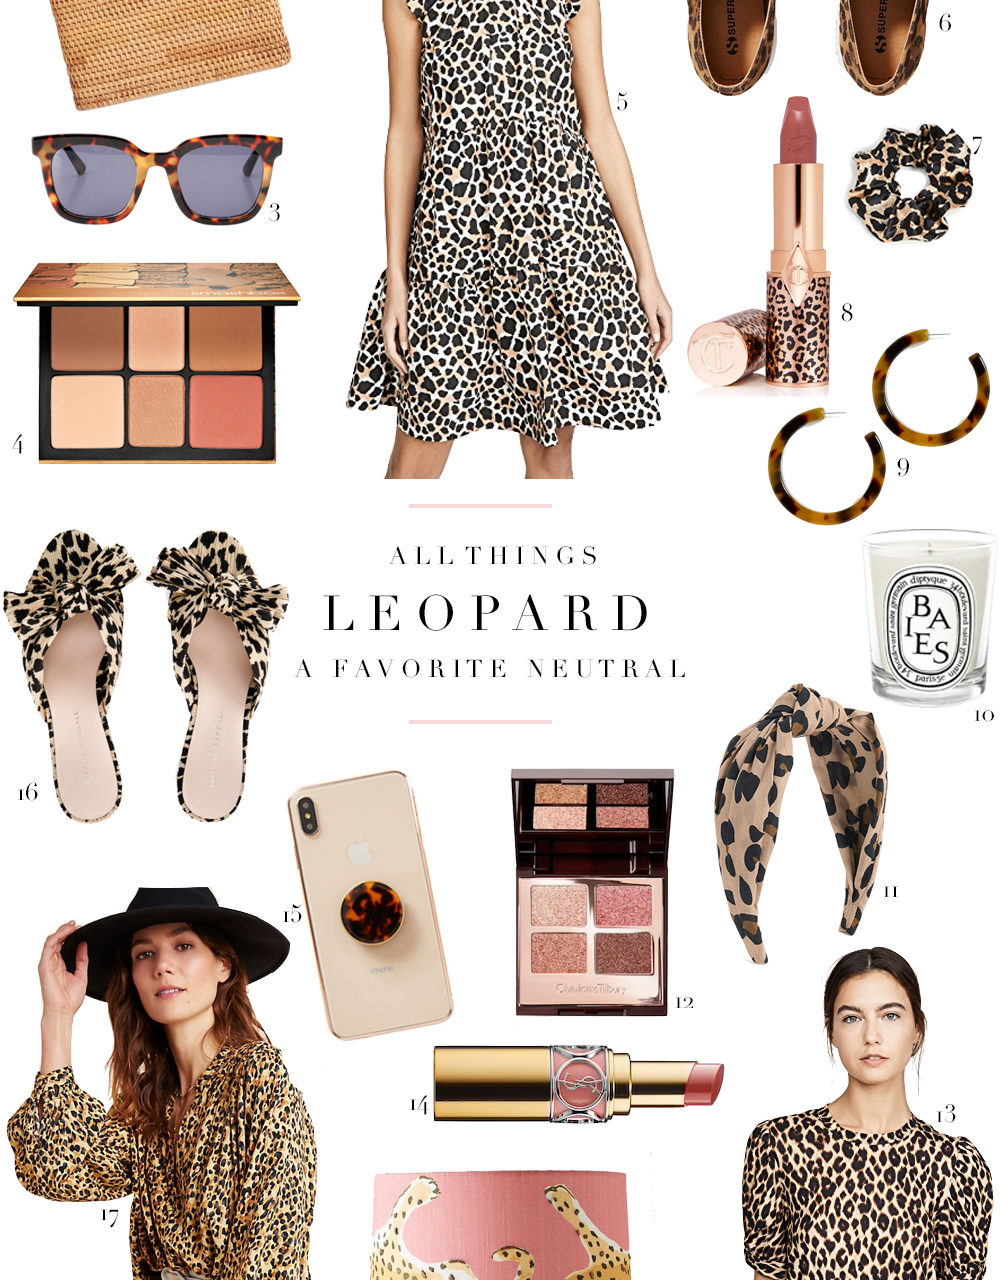 All things leopard